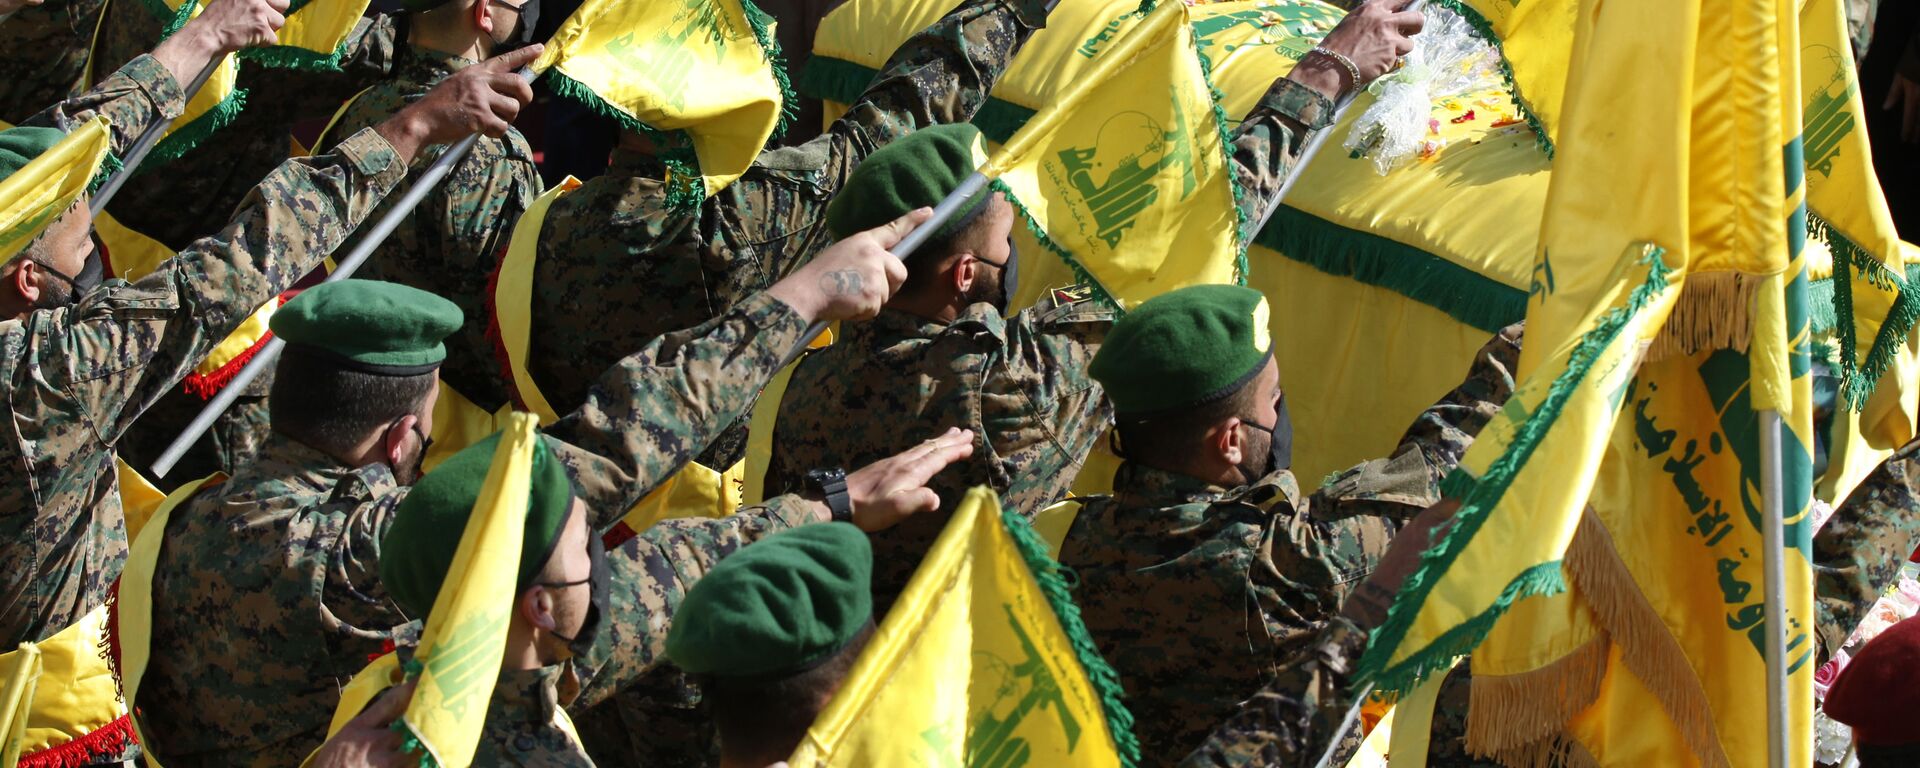 Hezbollah fighters raise their group flags, as they salut the coffin of their comrade Mohammed Tahhan who was shot dead on Friday by Israeli forces along the Lebanon-Israel border, during his funeral procession, in the southern village of Adloun, Lebanon, Saturday, May 15, 2021 - Sputnik International, 1920, 31.07.2022